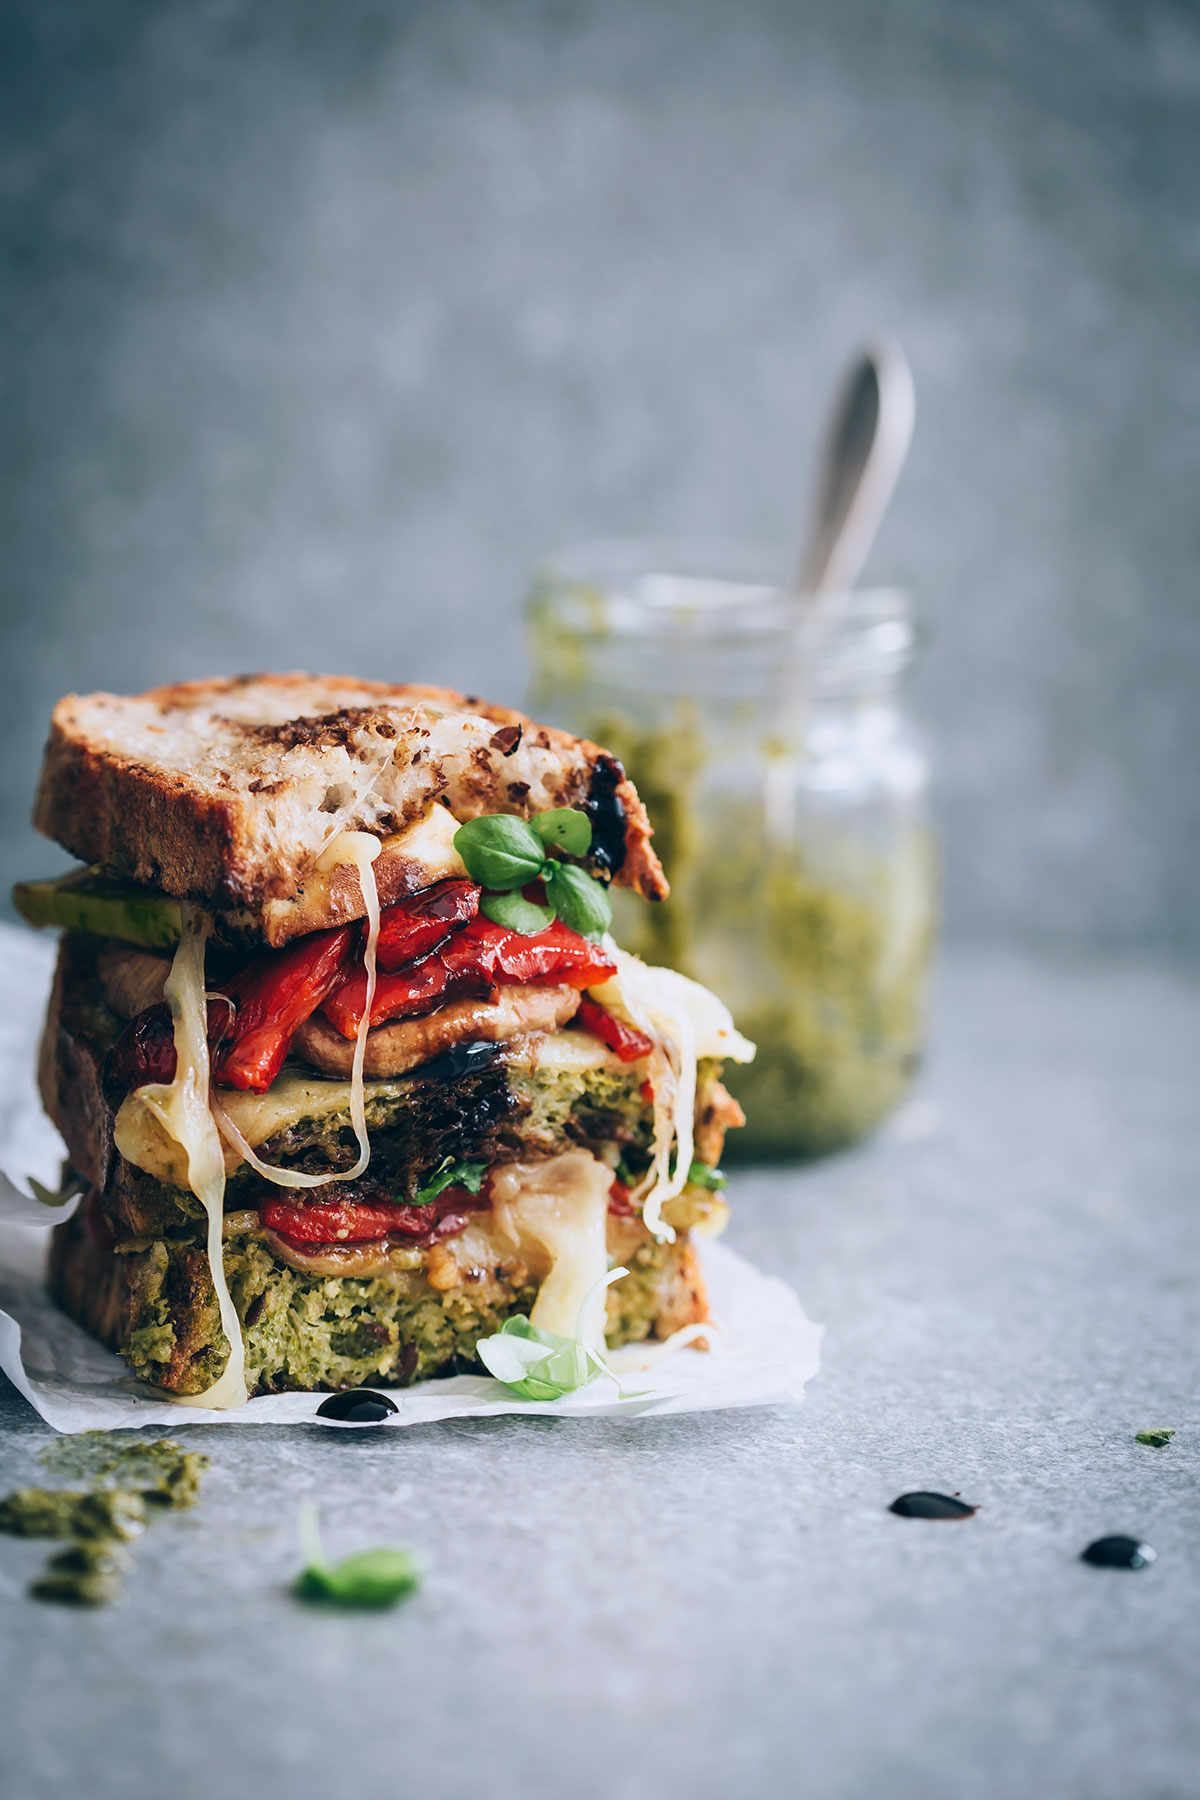 Grilled Vegetable Sandwiches with Havarti and Balsamic Drizzle